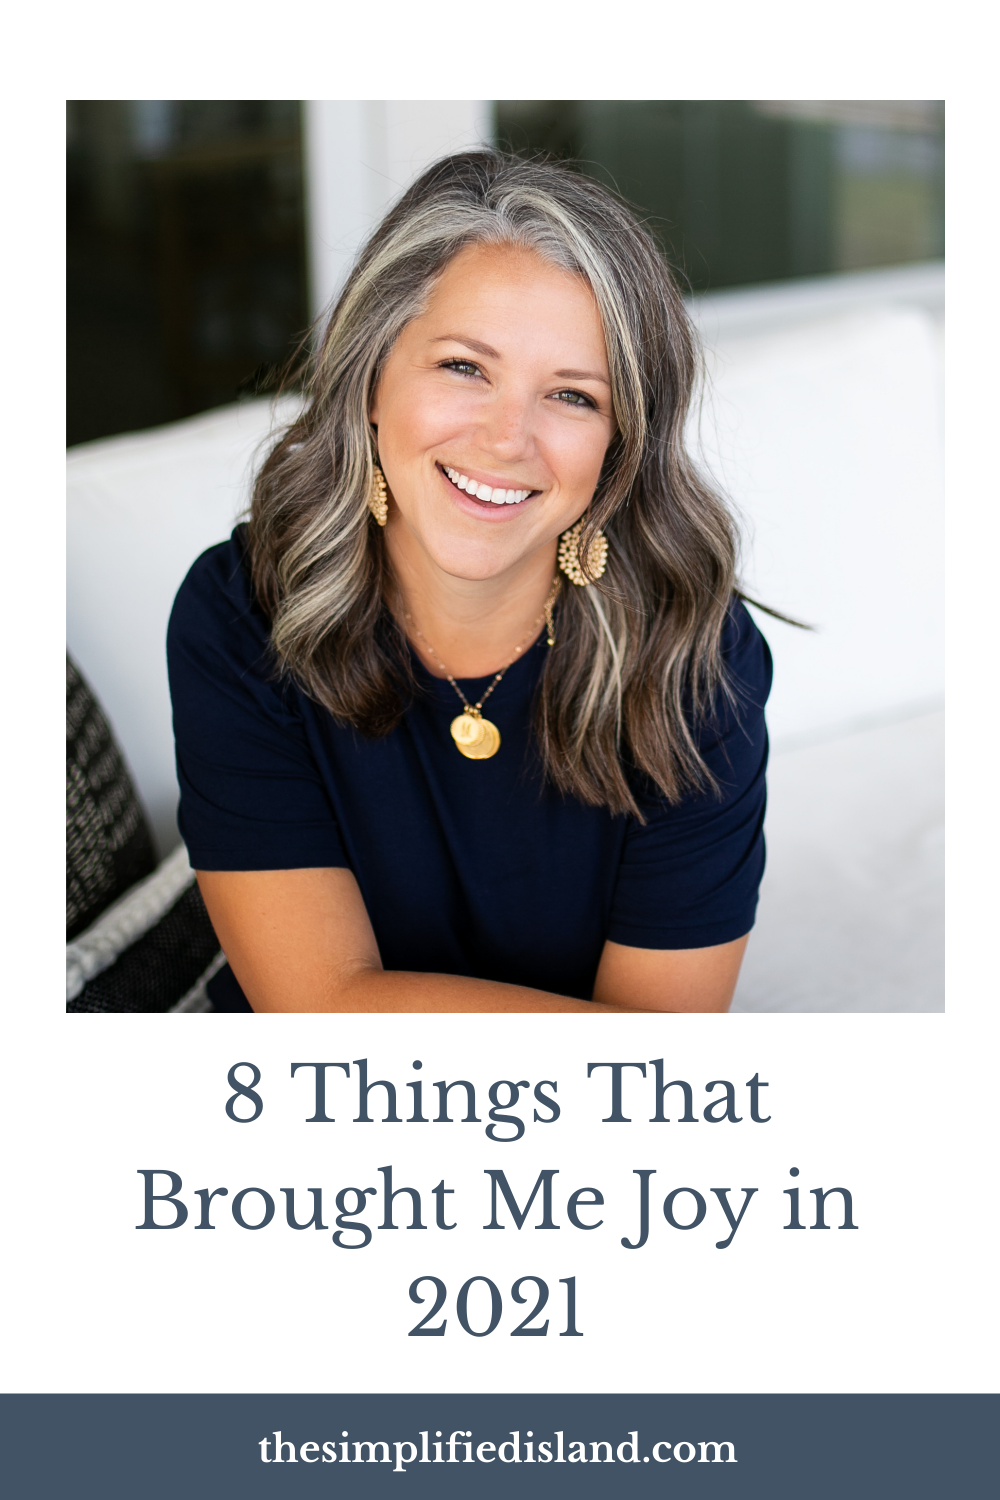 8 Things That Brought Me Joy in 2021